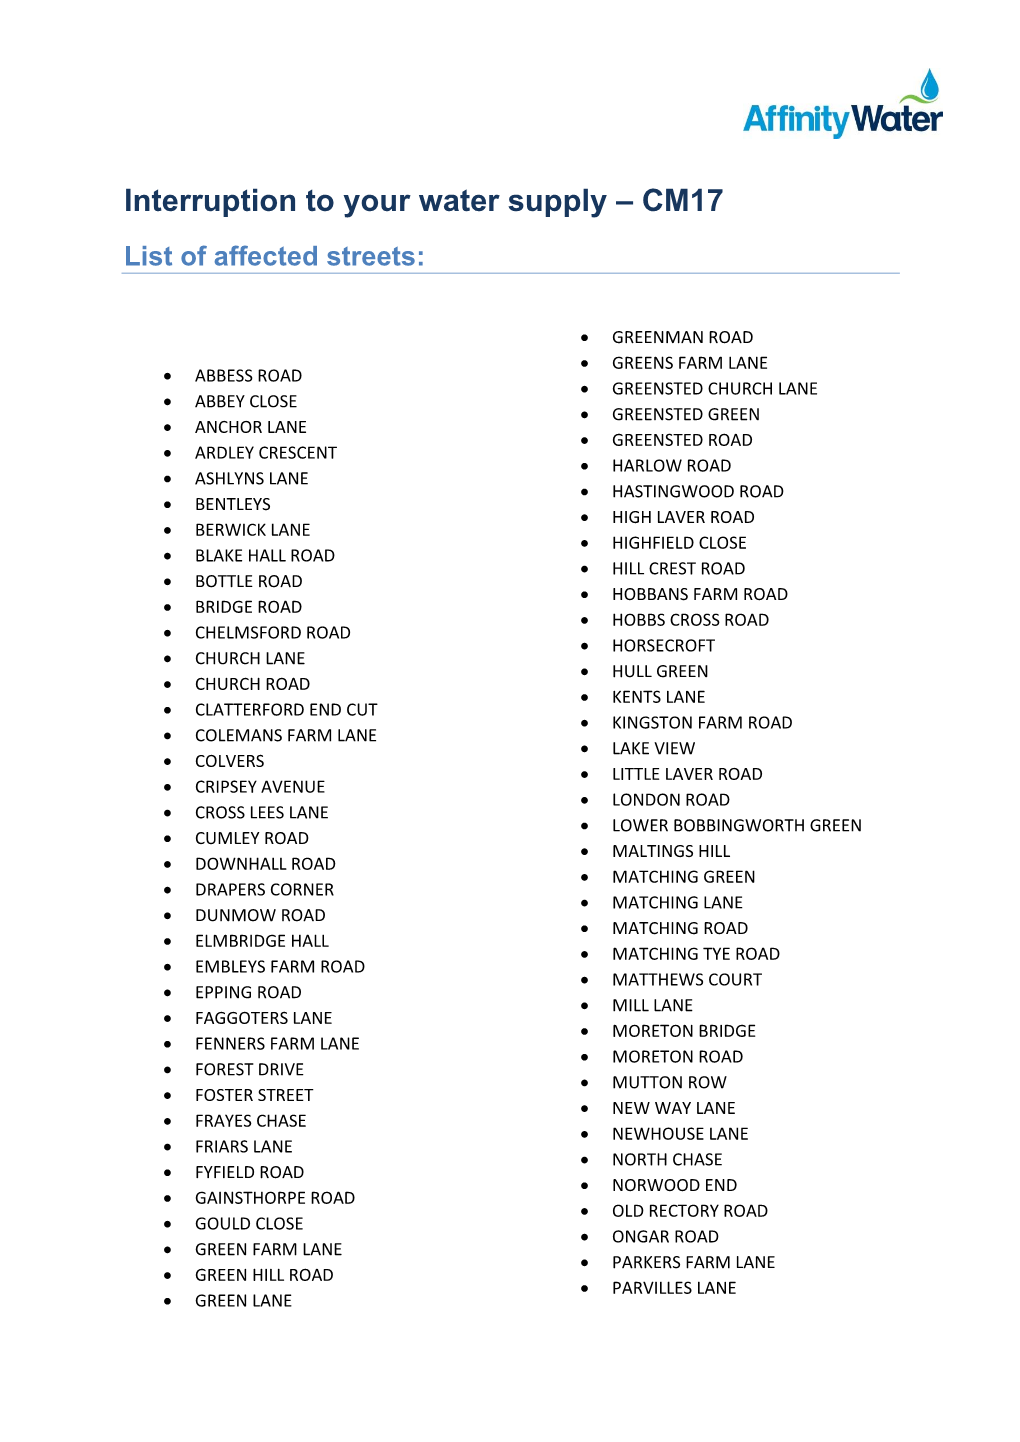 CM17 List of Affected Streets